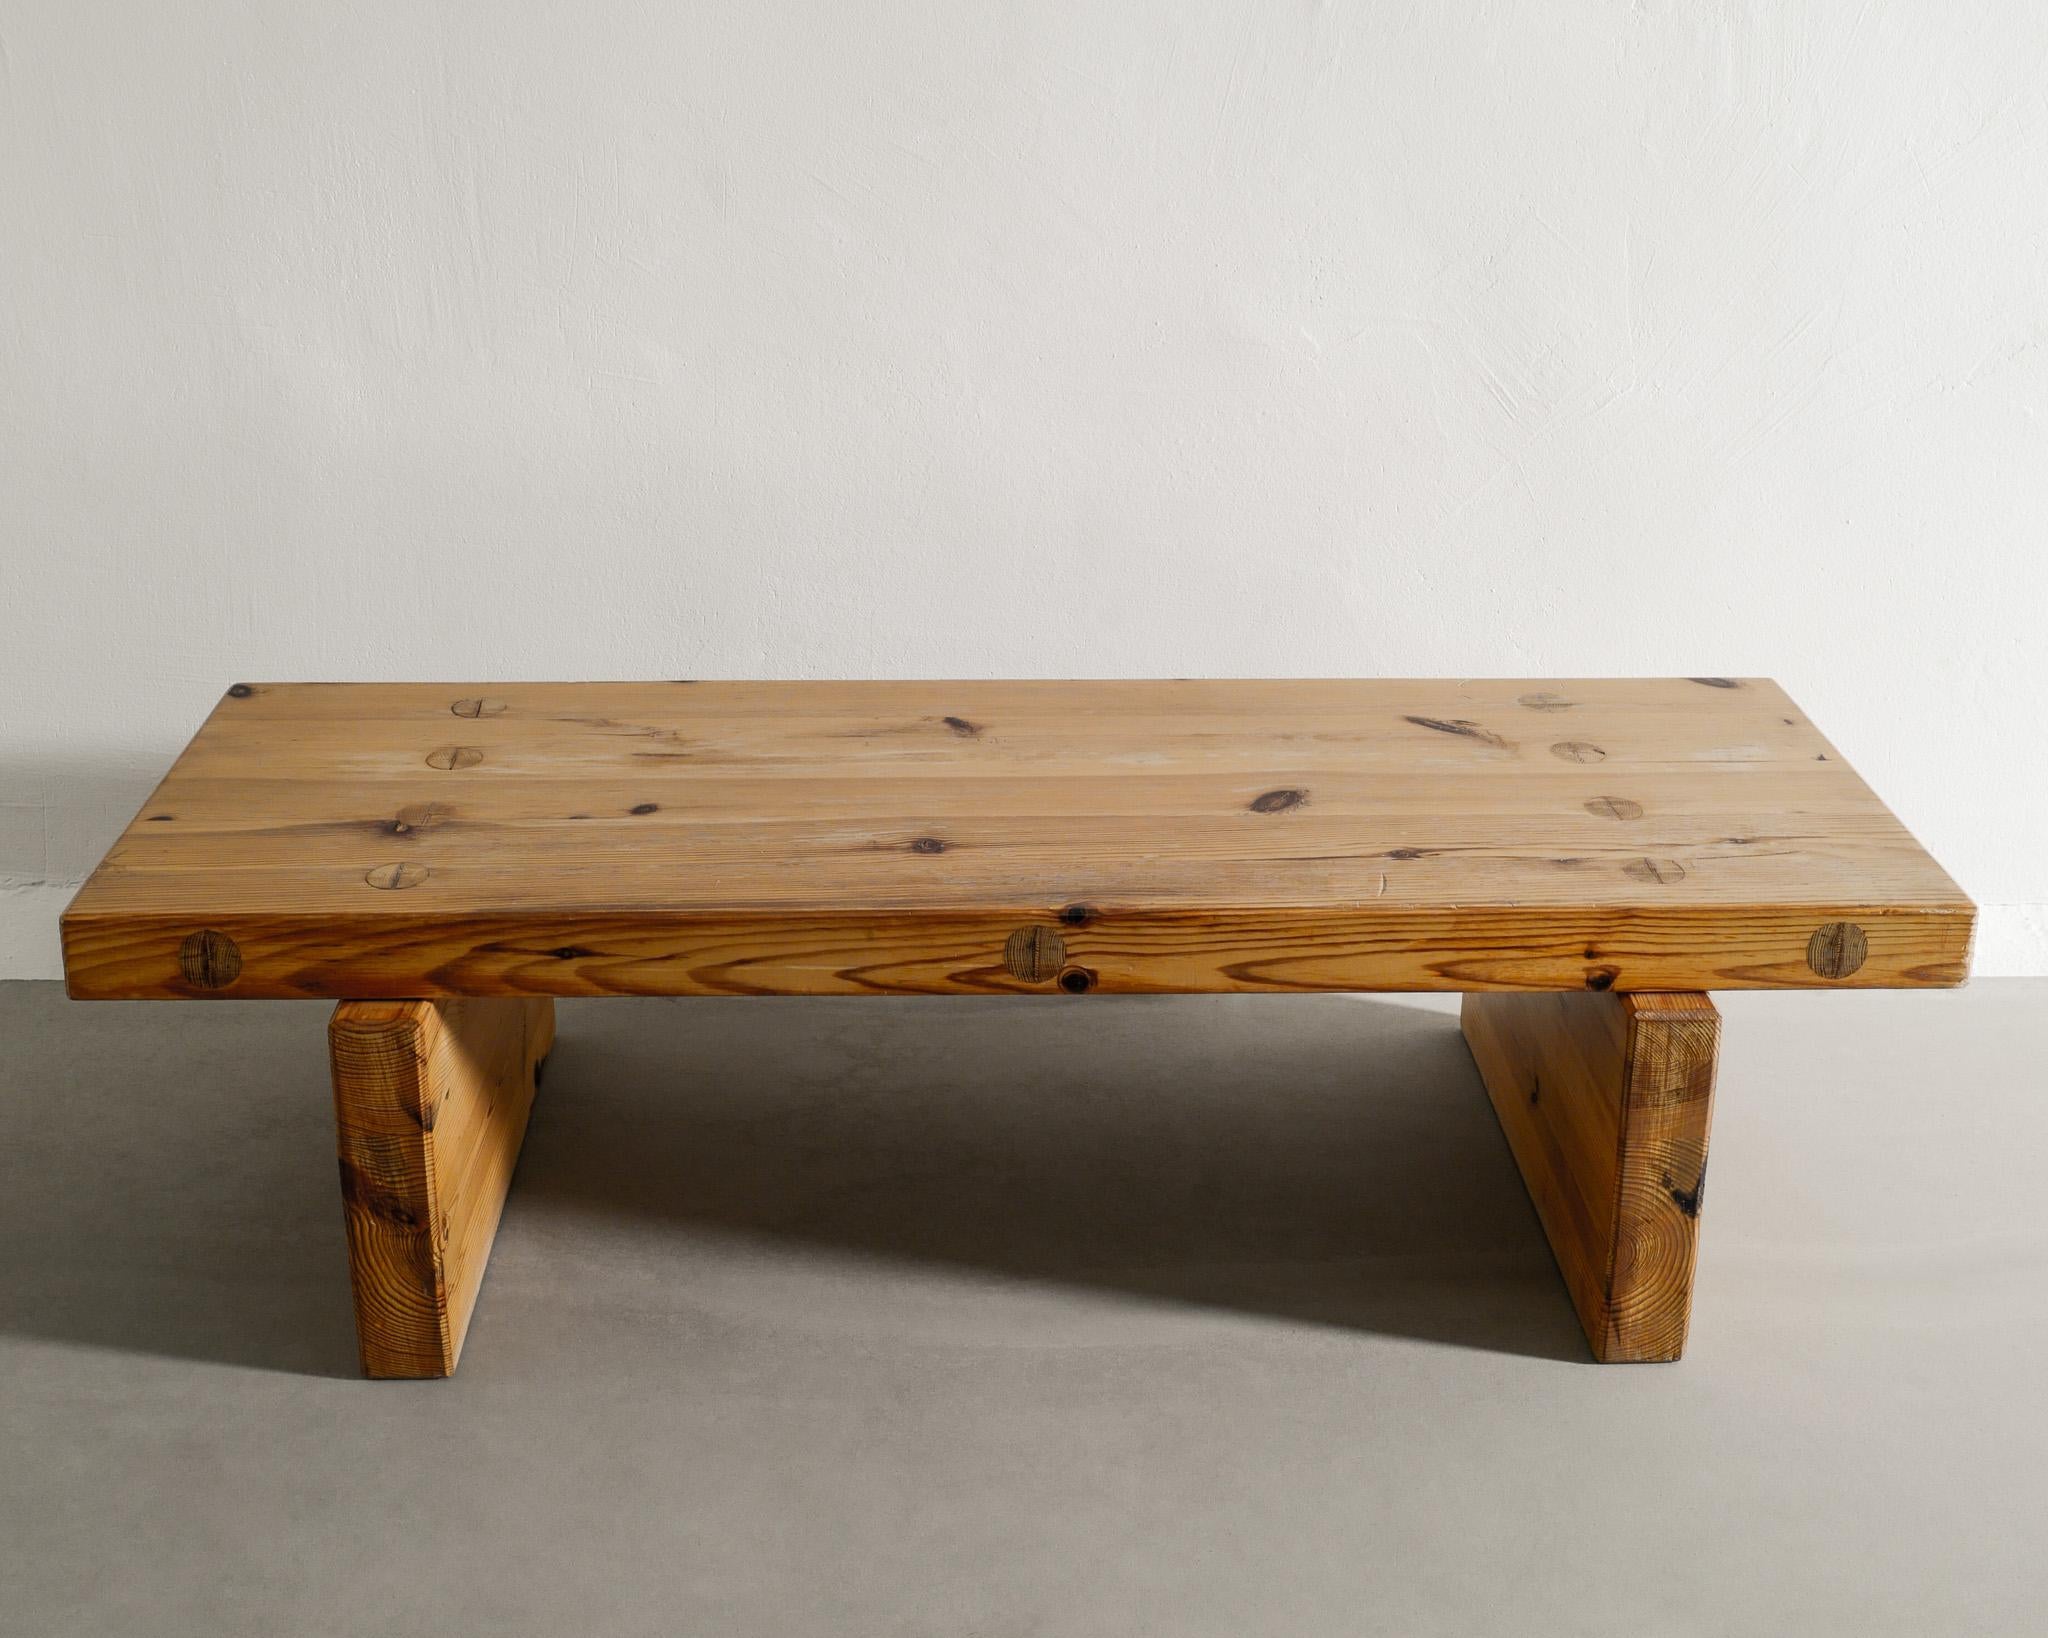 Rare mid century bench / coffee sofa table in solid pine by Roland Wilhelmsson dated March 1970. In good original condition. Signed. 
Perfect as a smaller table or bench behind the bed. 
It is this and our bench in all styled photos. 

Dimensions: